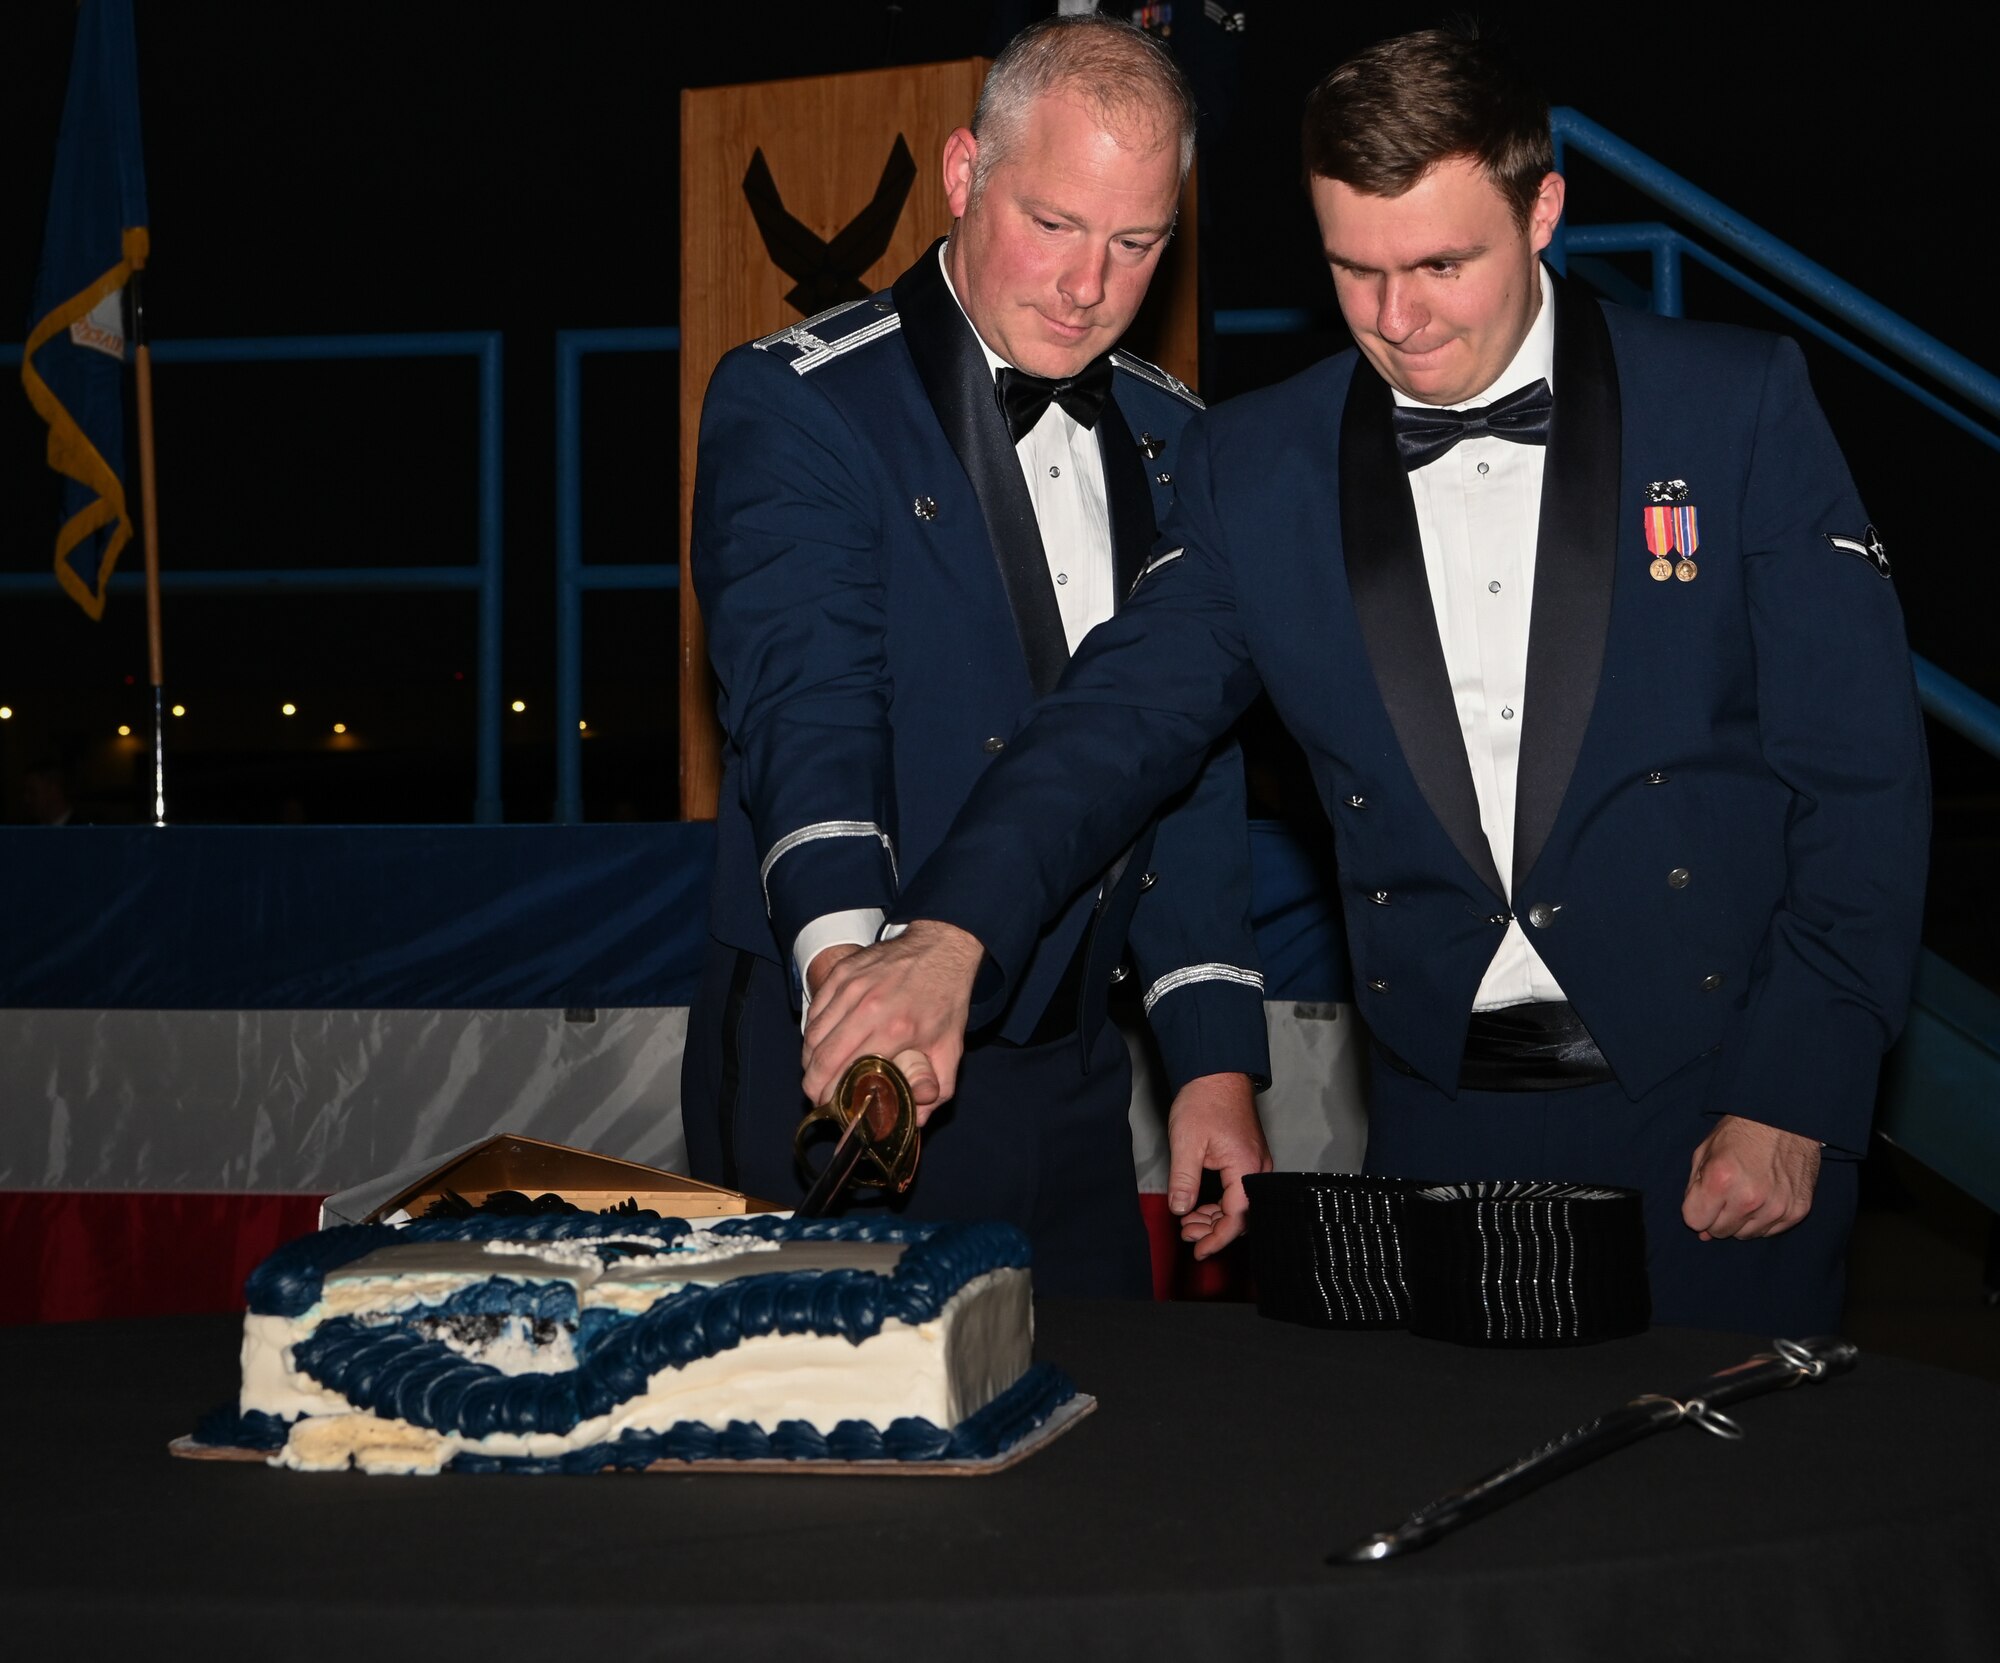 Col. Daniel Diehl, 509th Bomb Wing commander, helps cute the cake at the Air Force Ball at Whiteman Air Force Base, Missouri, September 16, 2022. The cake cutting ceremony celebrates the 75th Birthday of the U.S. Air Force, being tradition to cut it with a saber. (U.S. Air Force photo by Airman 1st Class Joseph Garcia)